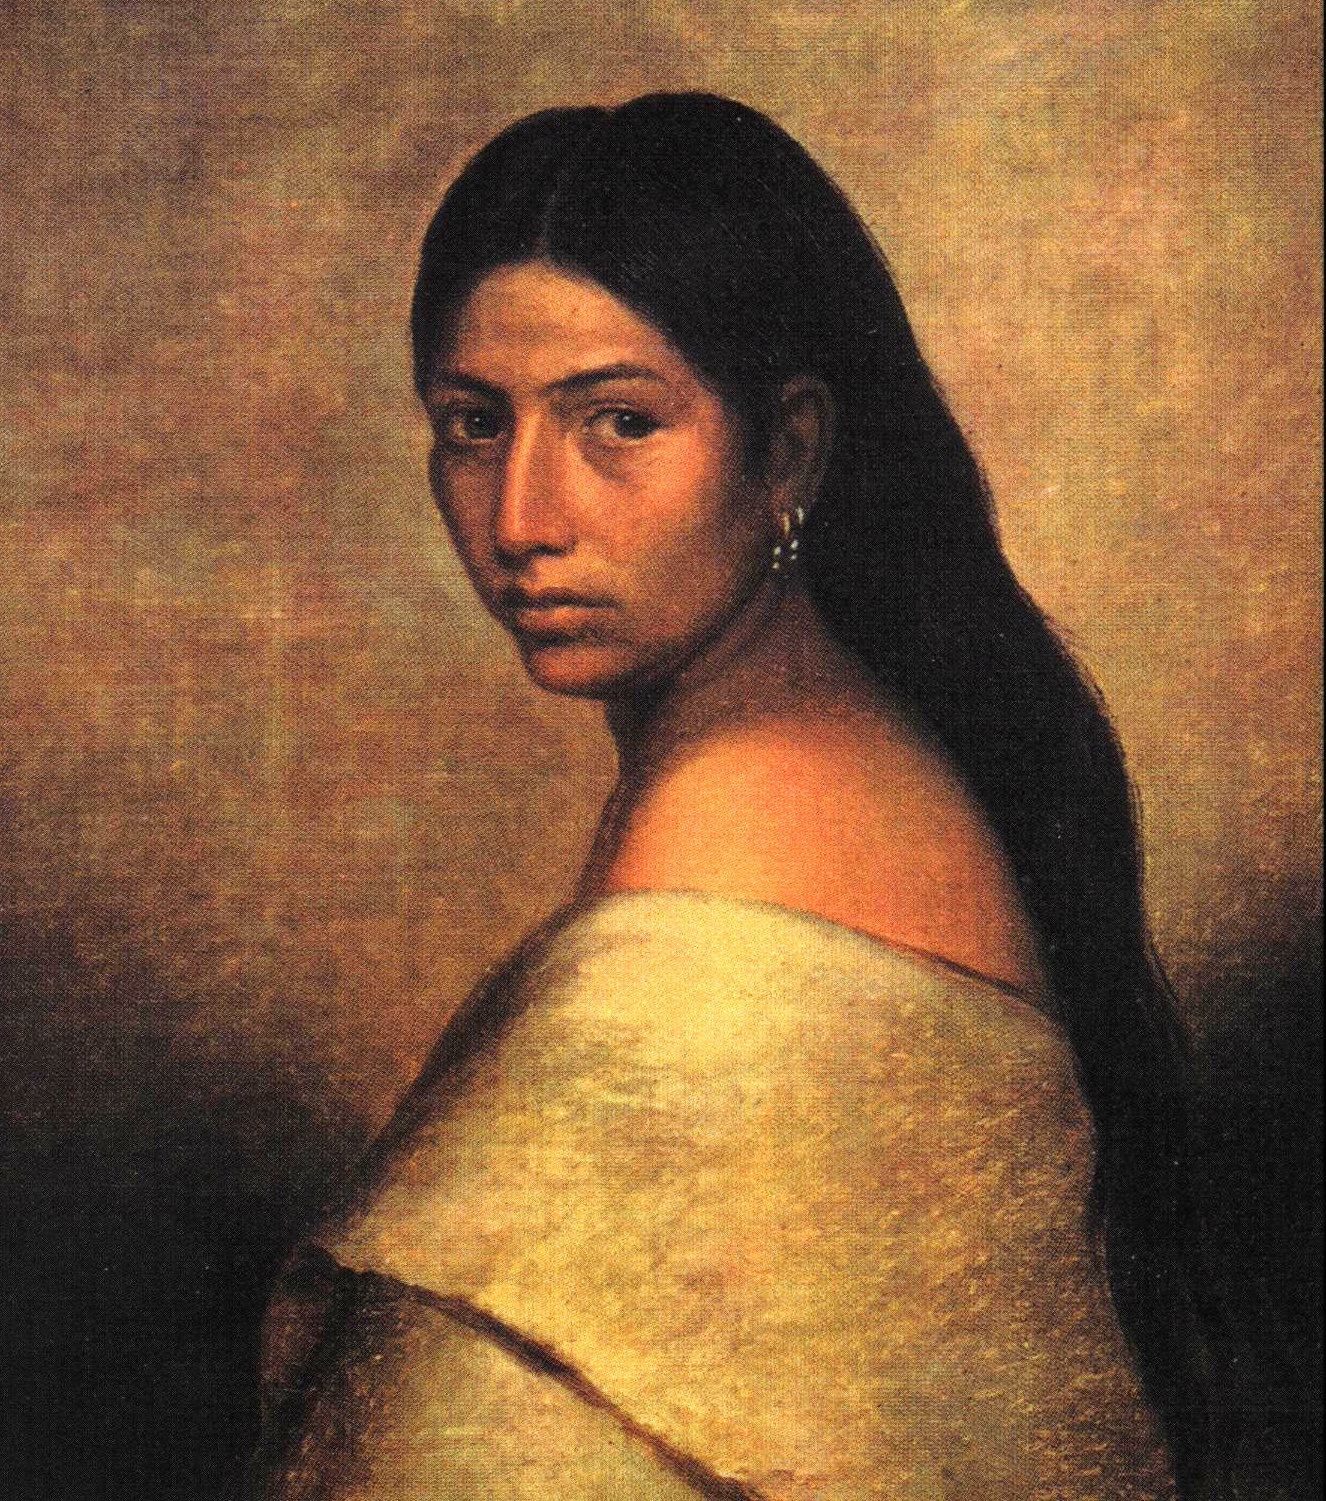 A side profile portrait of a young Choctaw woman with long hair.